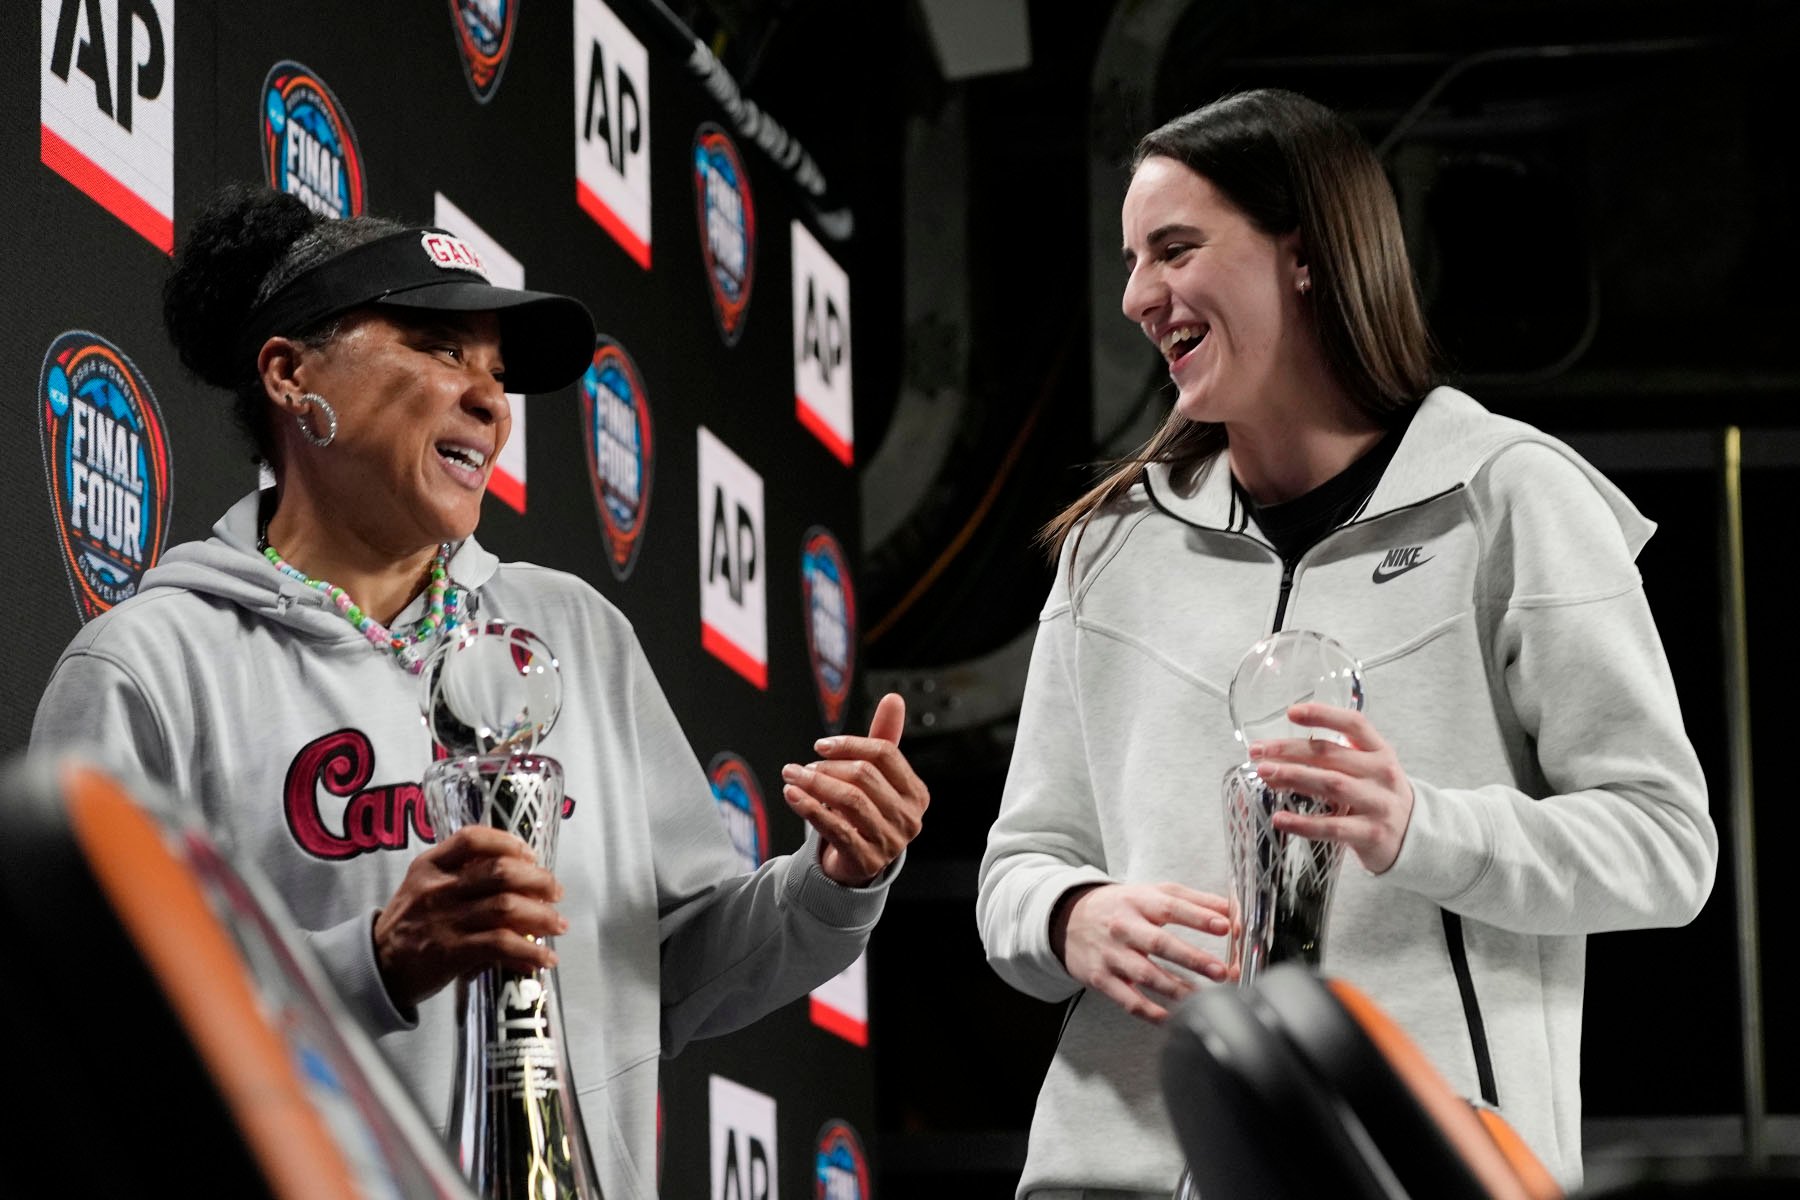 South Carolina head coach Dawn Staley and Iowa's Caitlin Clark stand together on stage during a news conference announcing the AP NCAA Women's Coach and Player of the Year.